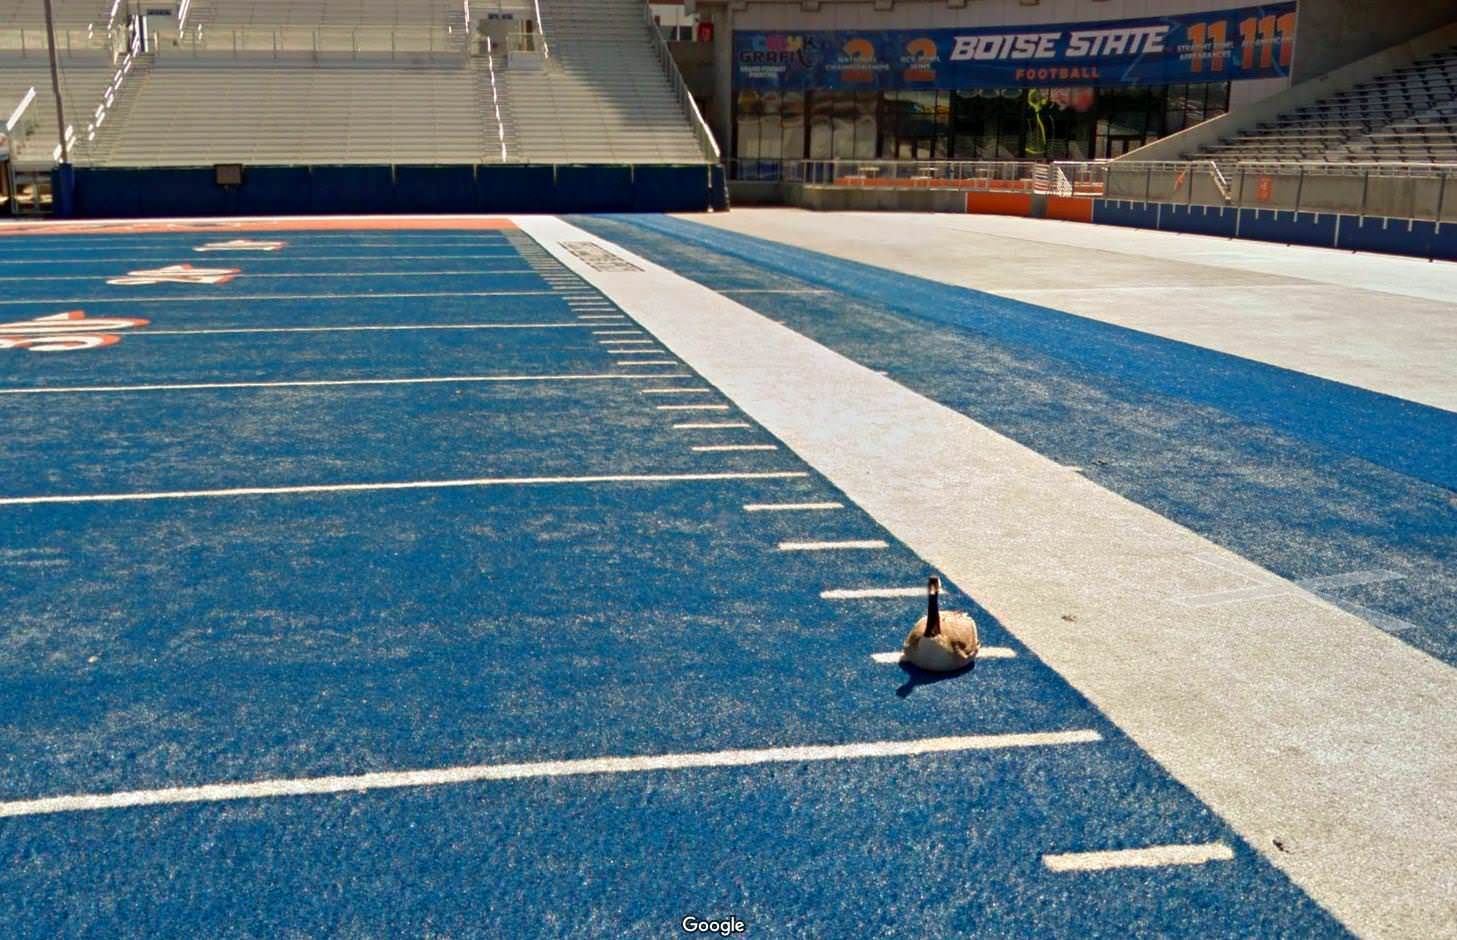 Boise state has a blue football field. It confuses out of towners.